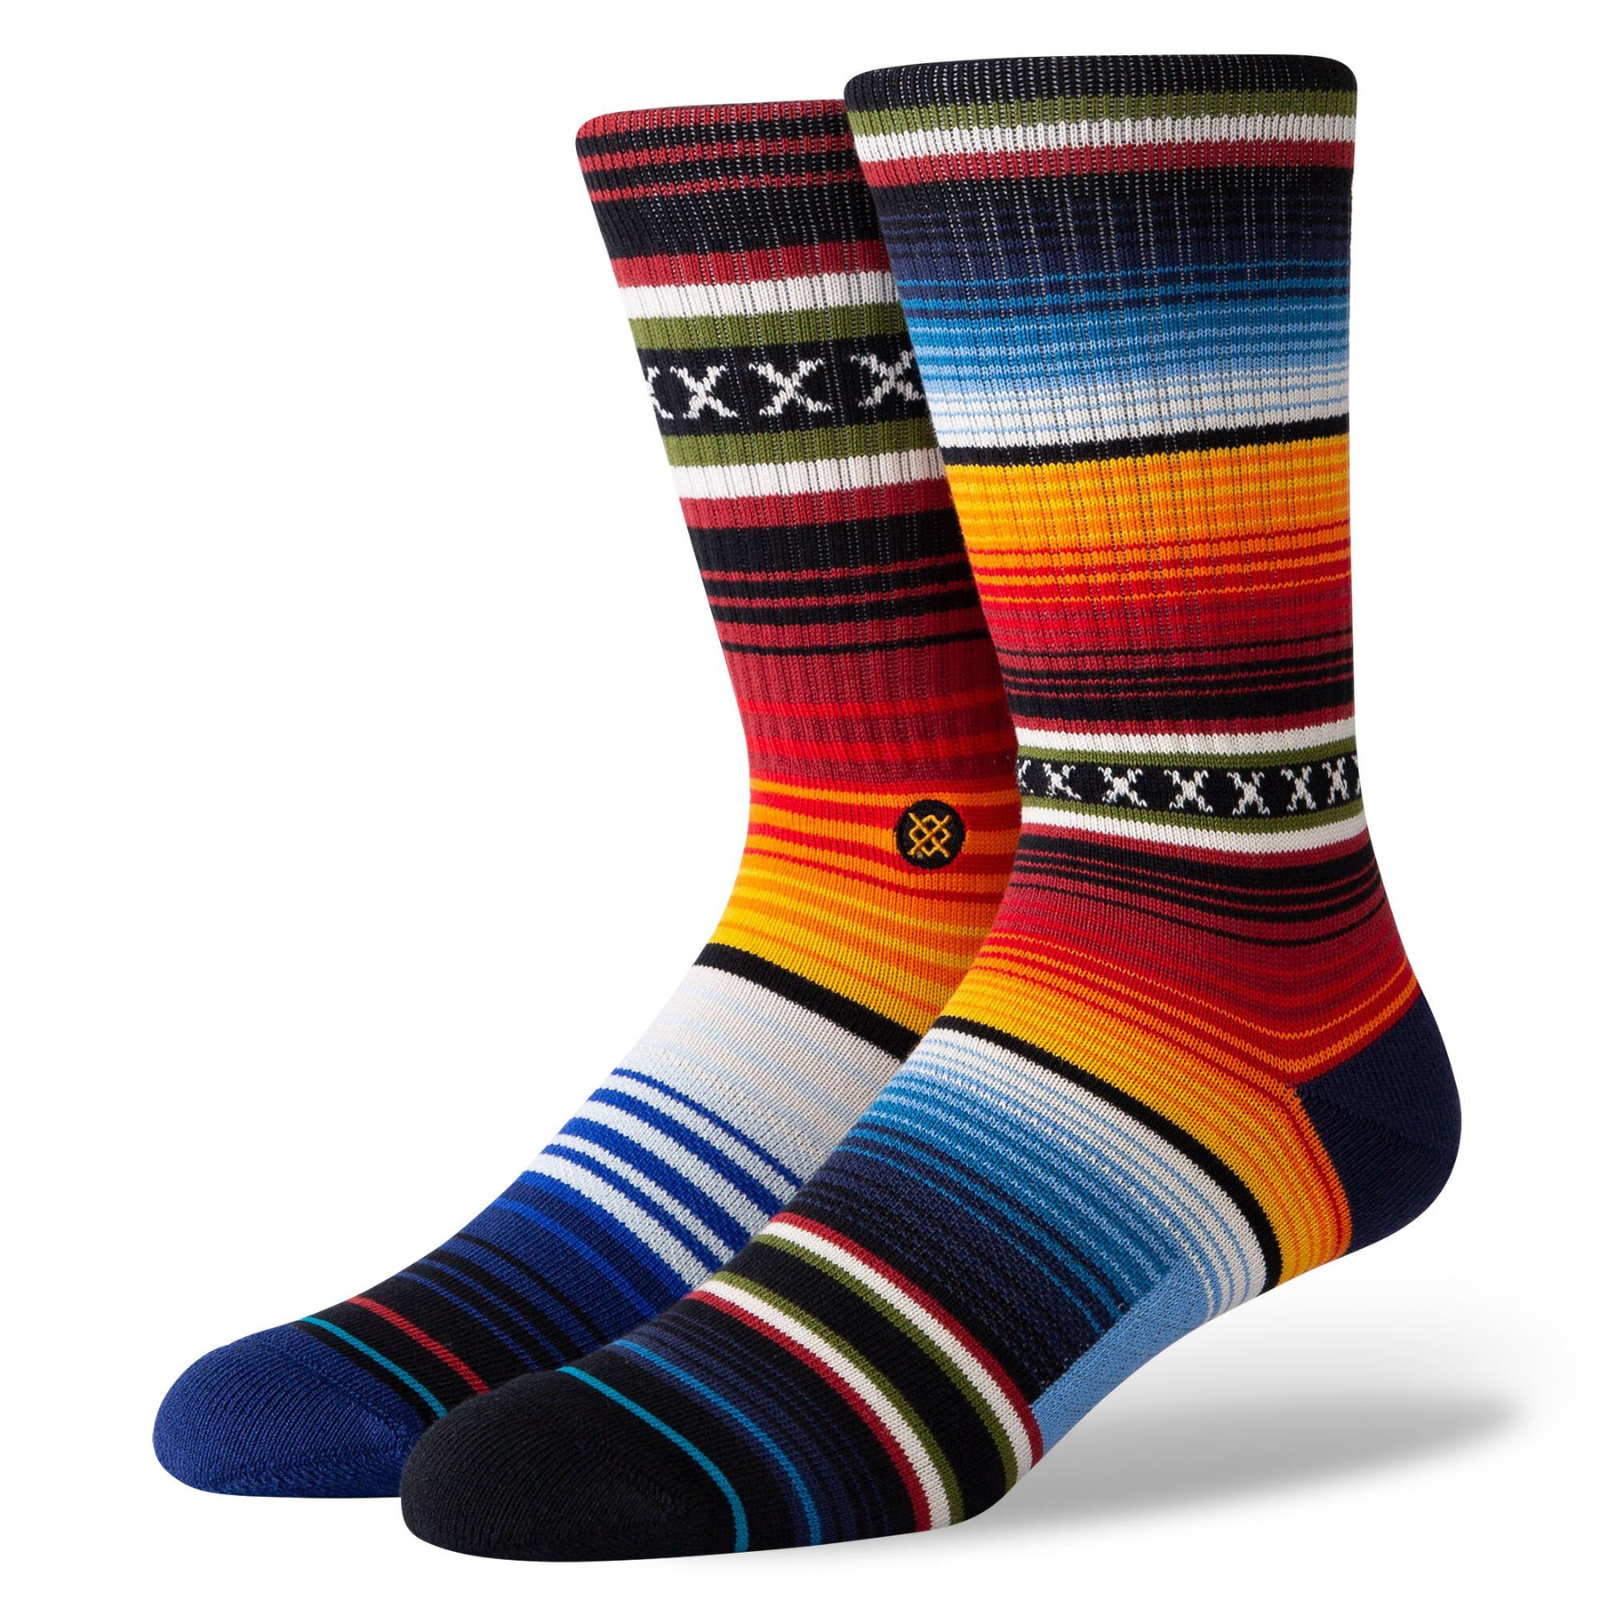 Stance Curren men's sock featuring multi-colored stripes on mis-matched socks. Socks shown on display feet. 